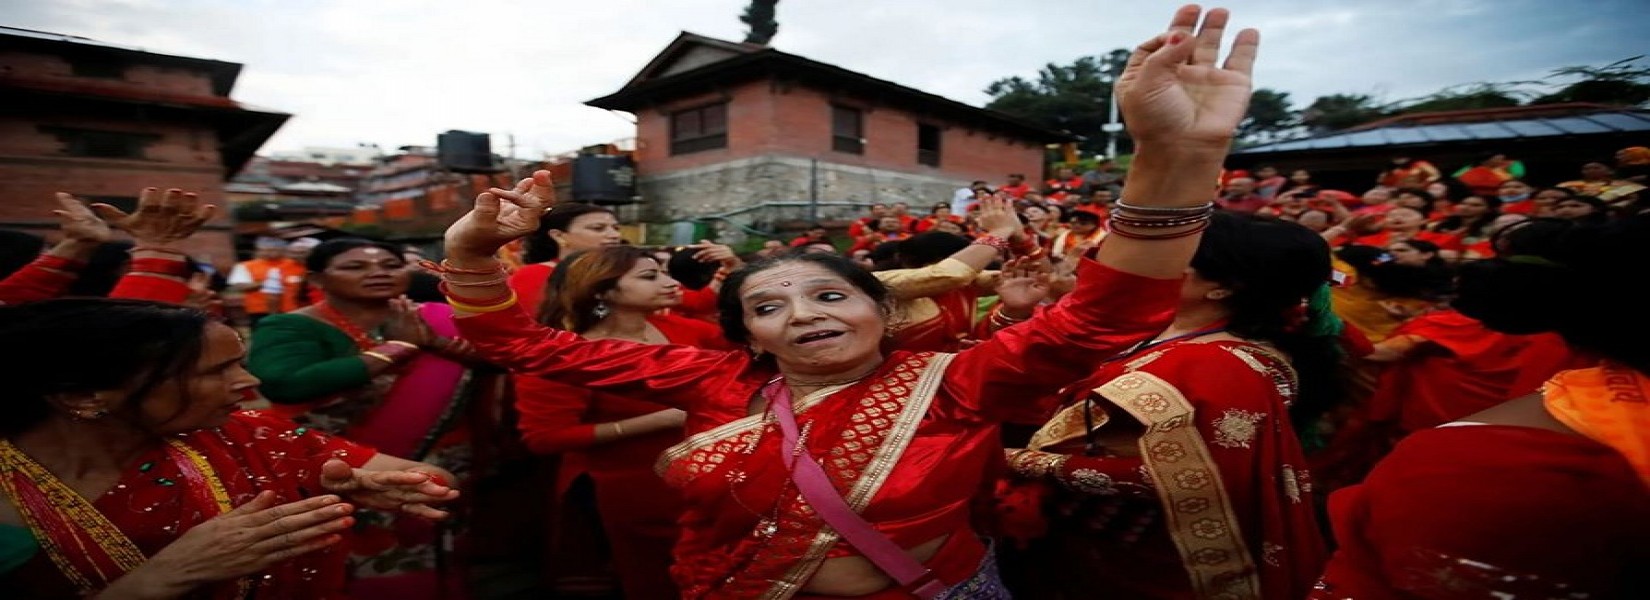 Women sing and dance at Pashupatinath temple during Teej festival